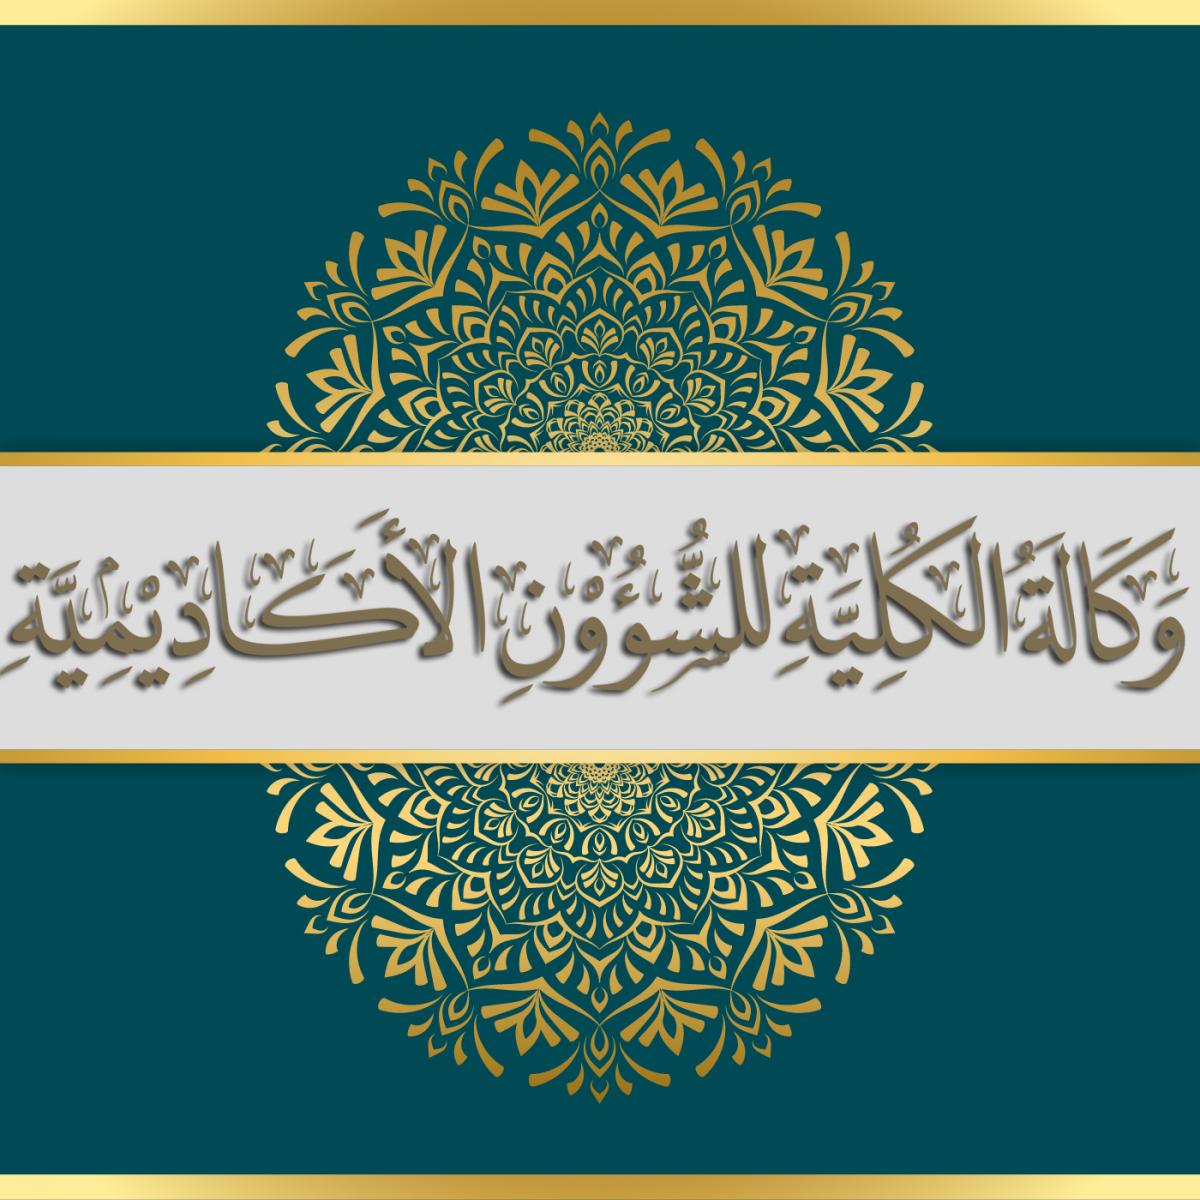 Vice Deanship of the College of Da`wah and Fundamentals of Religion for Academic Affairs